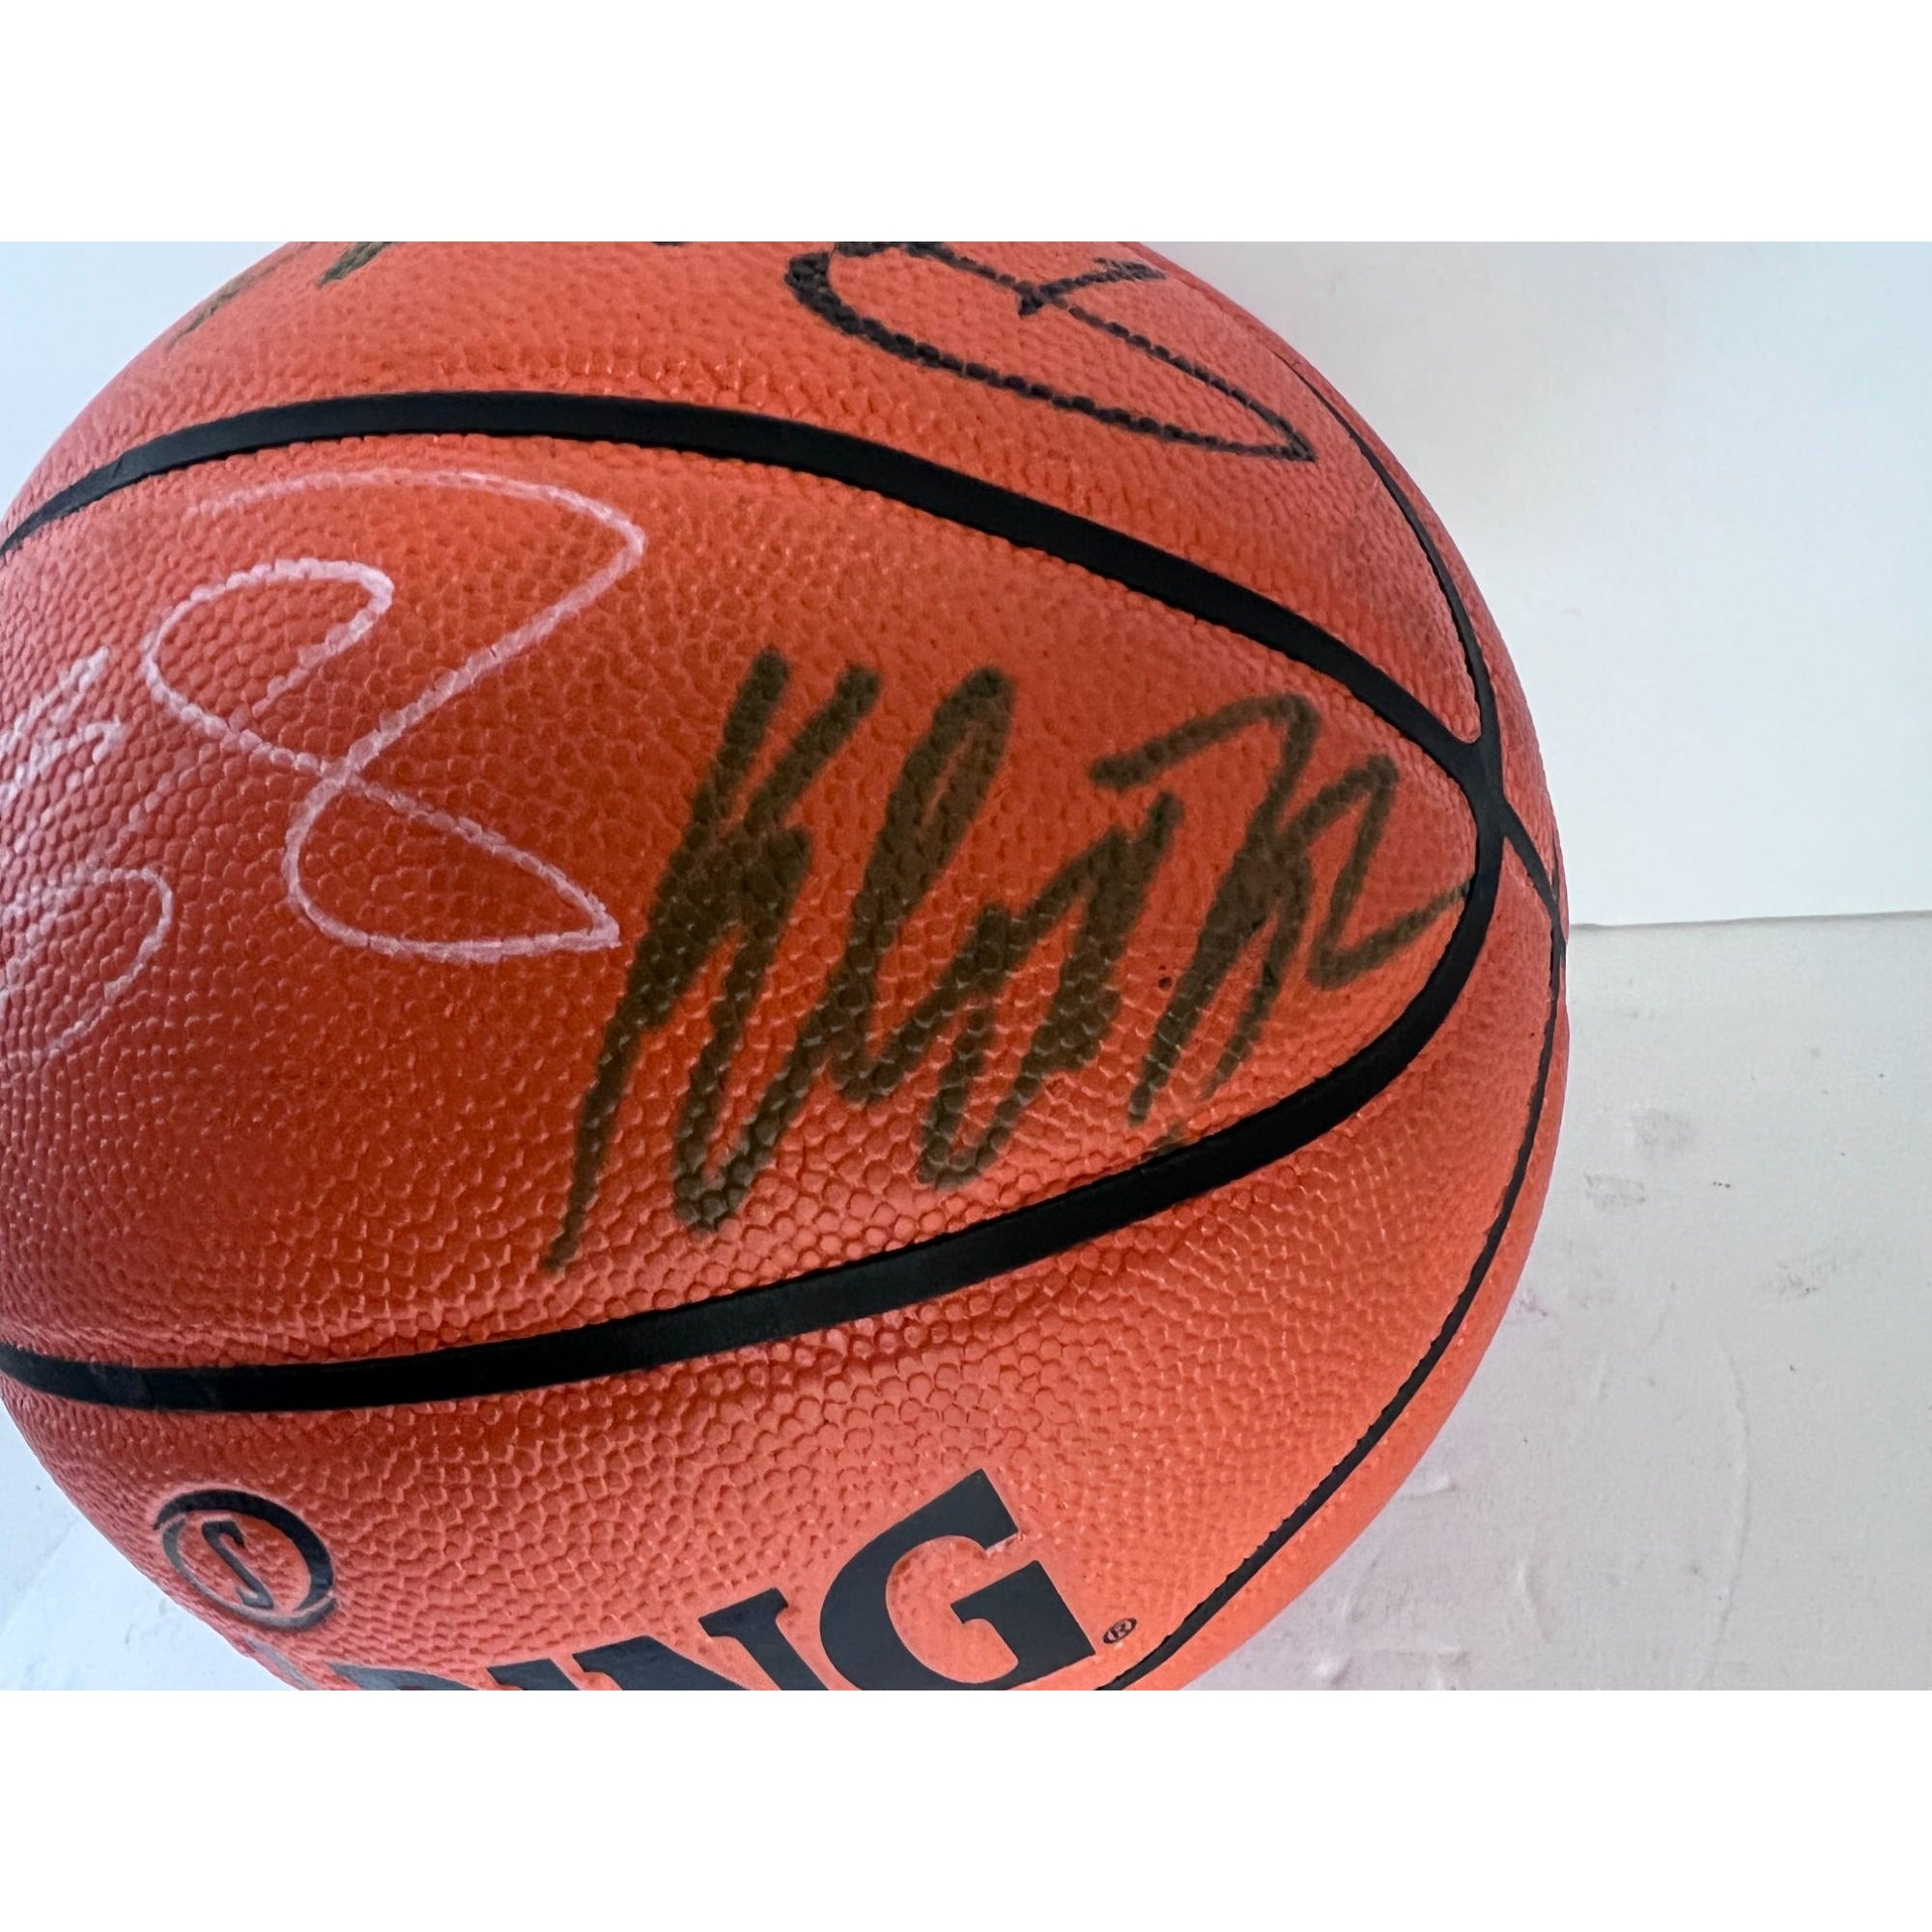 LeBron James Steph Curry Kevin Durant Anthony Davis Damian Lillard NBA superstars Spalding basketball signed with proof